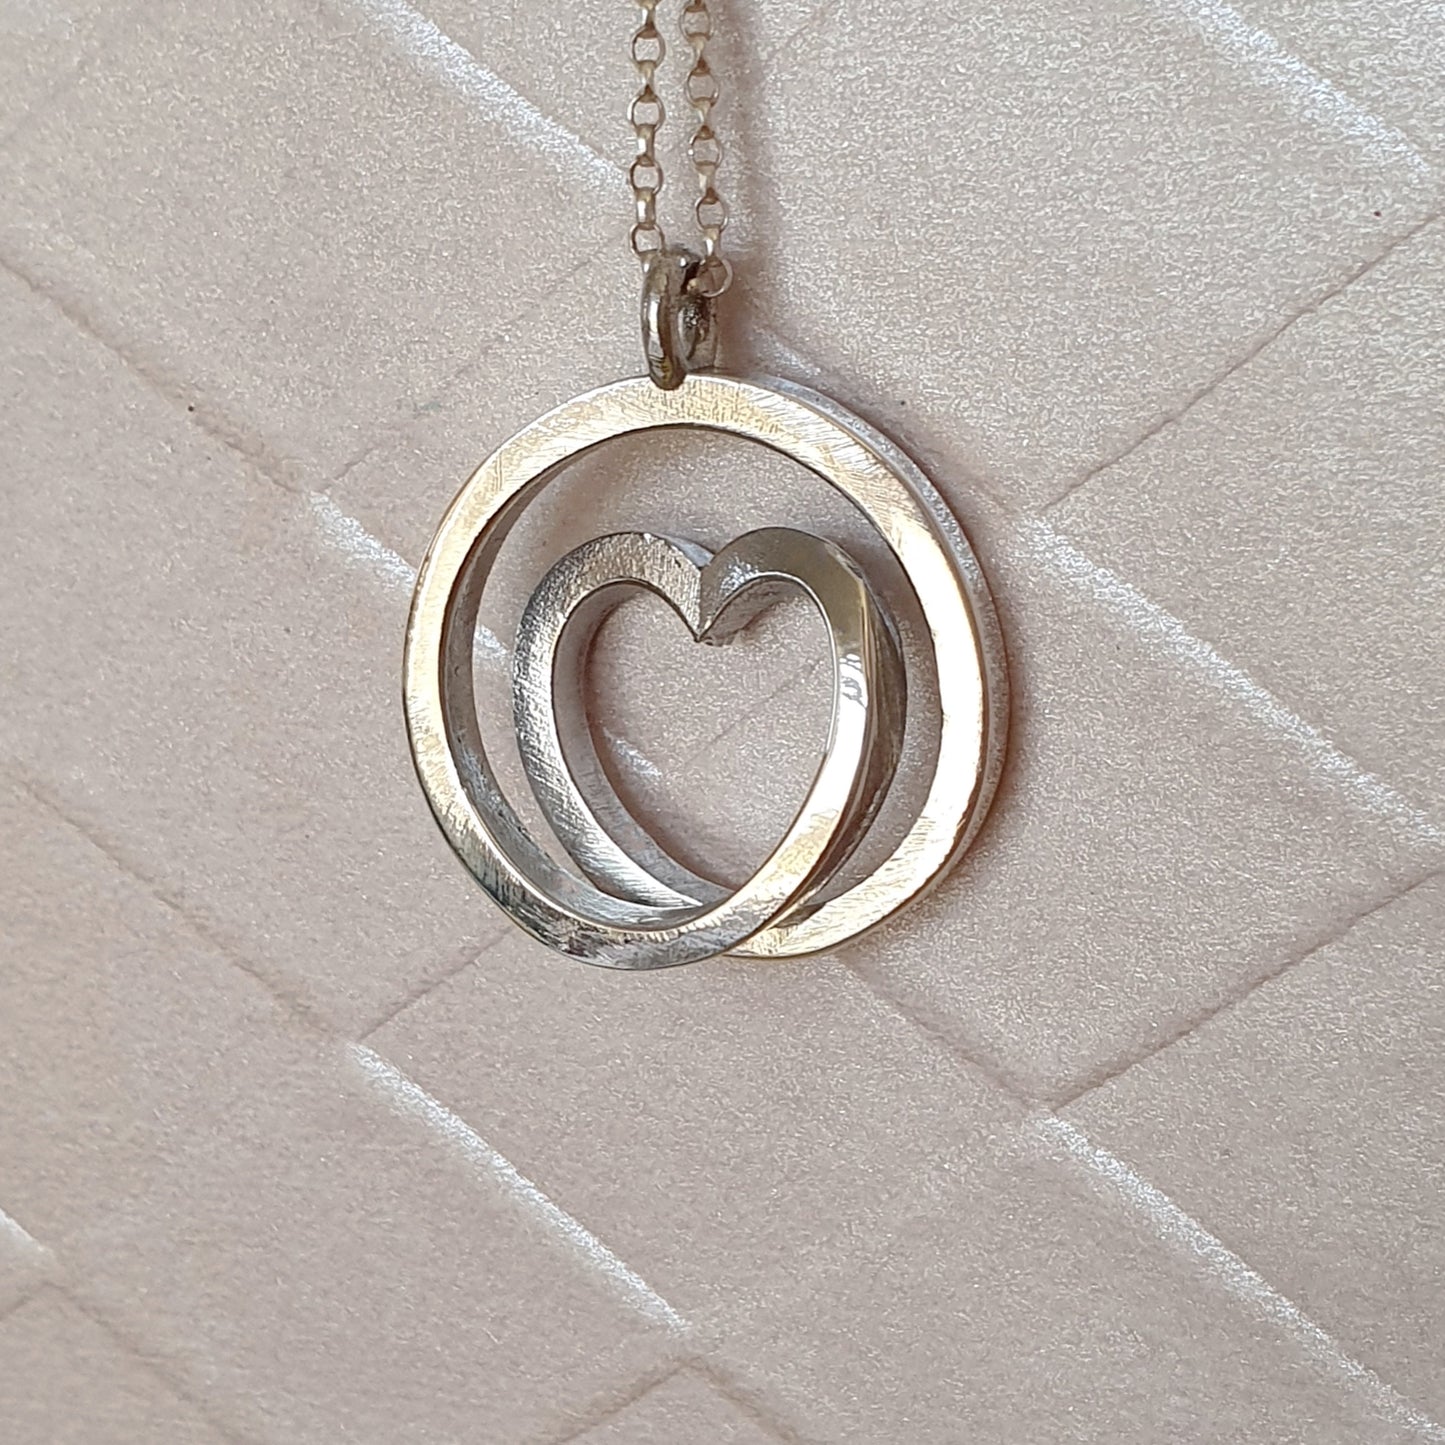 Infinite love classic - Sterling silver spiral necklace